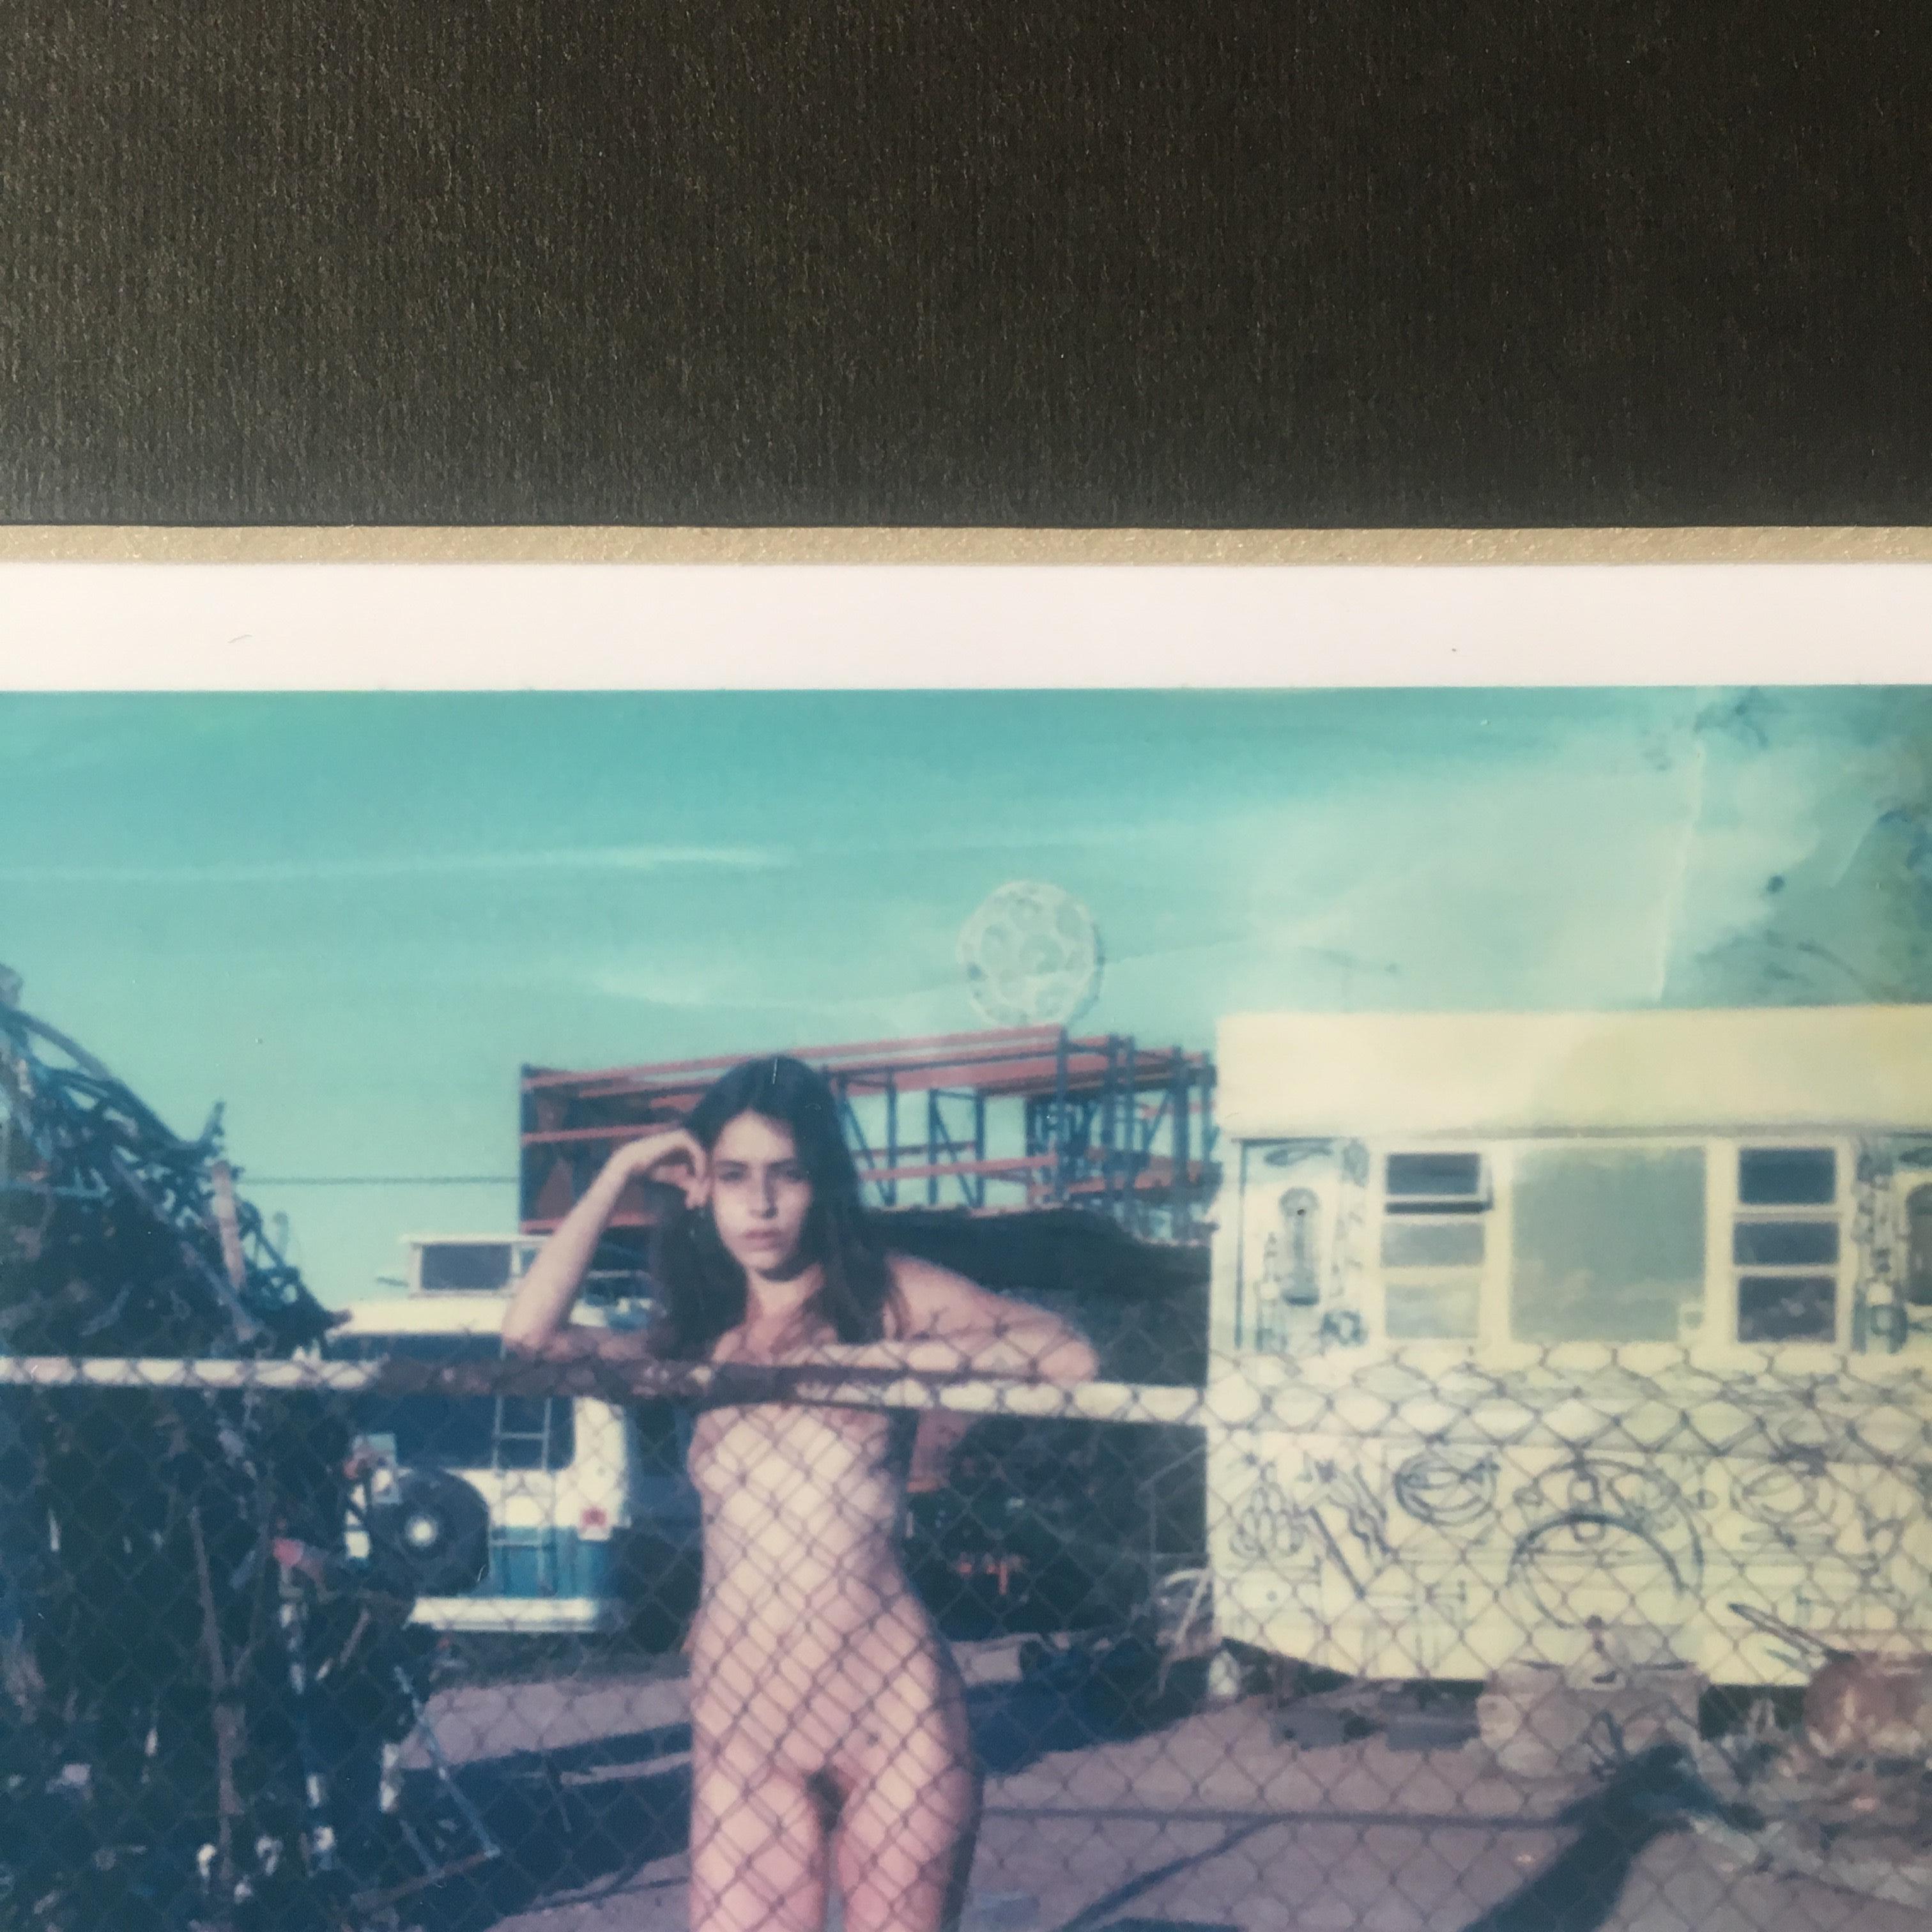 'Don't fence me in' (Bombay Beach) 2019, 
Polaroid Original - Unique Piece, 10.8 × 8.3 cm
Framed. Frame size: 27,2cm wide by 22,2cm high 
Signed on the back frame. Artist inventory PL2019-583.

Kirsten Thys van den Audenaerde is a self-taught